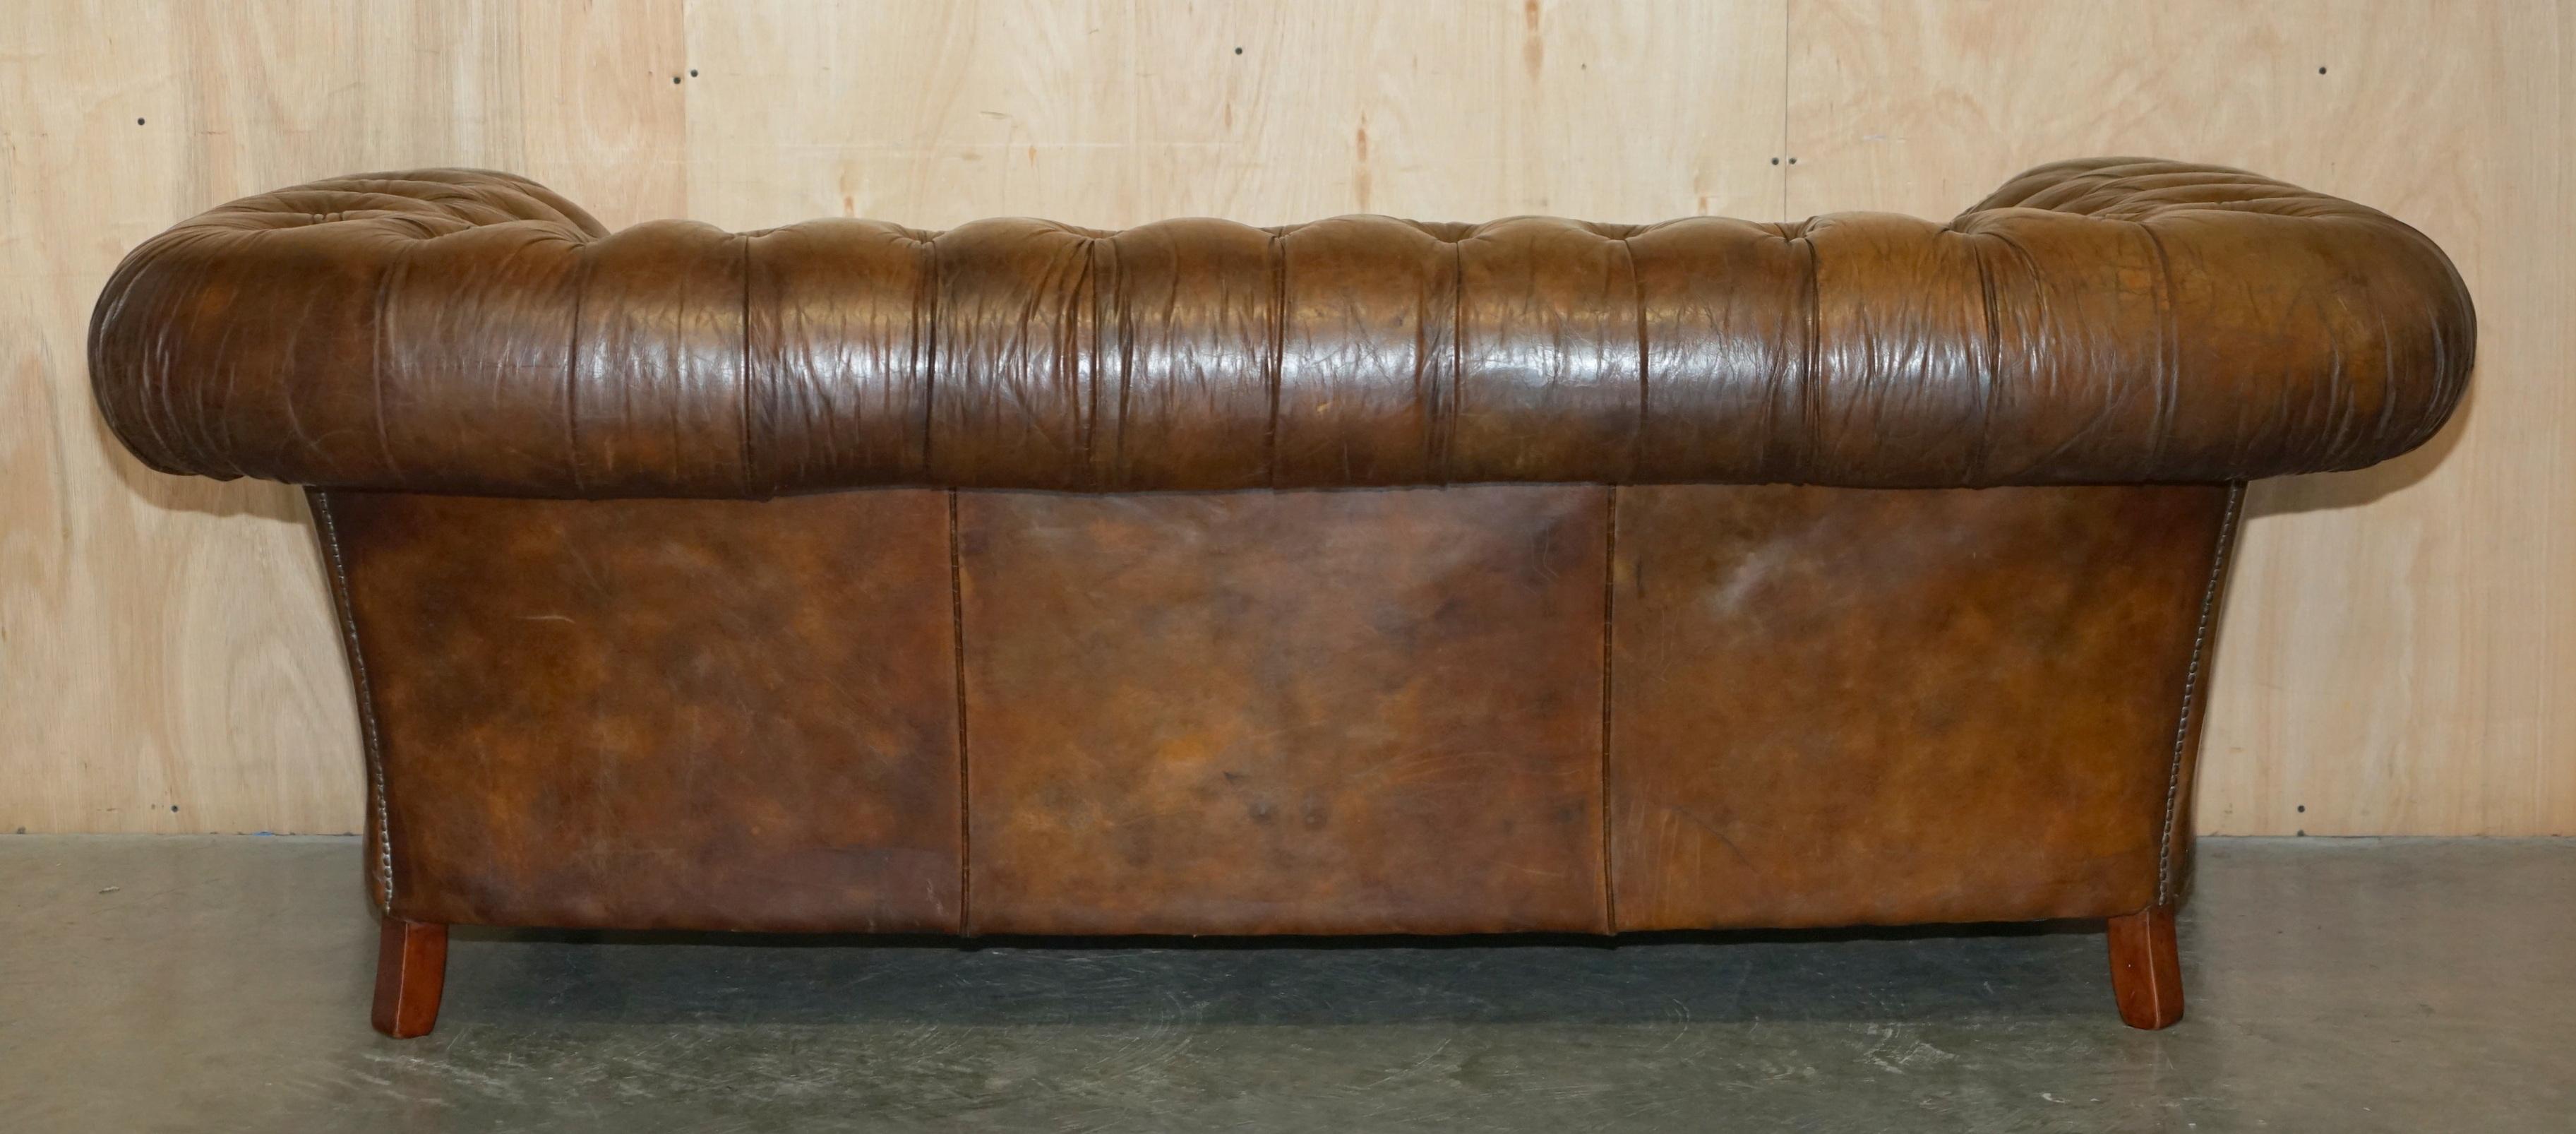 1 OF 2 TIMOTHY OULTON HERITAGE BROWN OVERSIZED LEATHER CHESTERFIELD HALO SOFAs For Sale 5